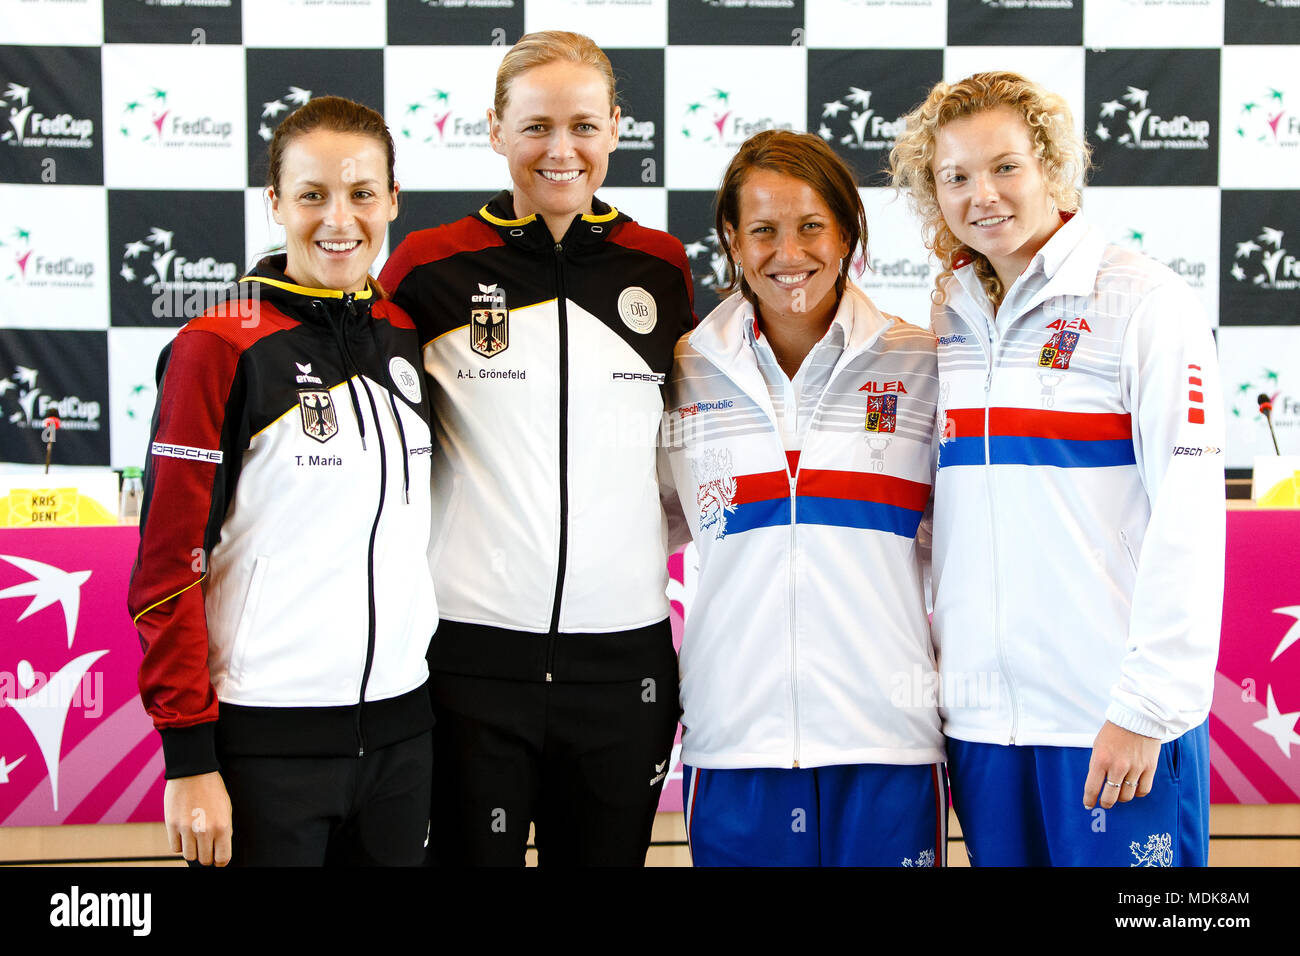 Stuttgart, Germany, 20th April, 2018. German tennis player Tatjana Maria and Anna-Lena Groenefeld with czech players Barbora Strycova  and Katerina Siniakova during the draw ceremony before the Fed Cup Semifinals. Credit: Frank Molter/Alamy Live News Stock Photo